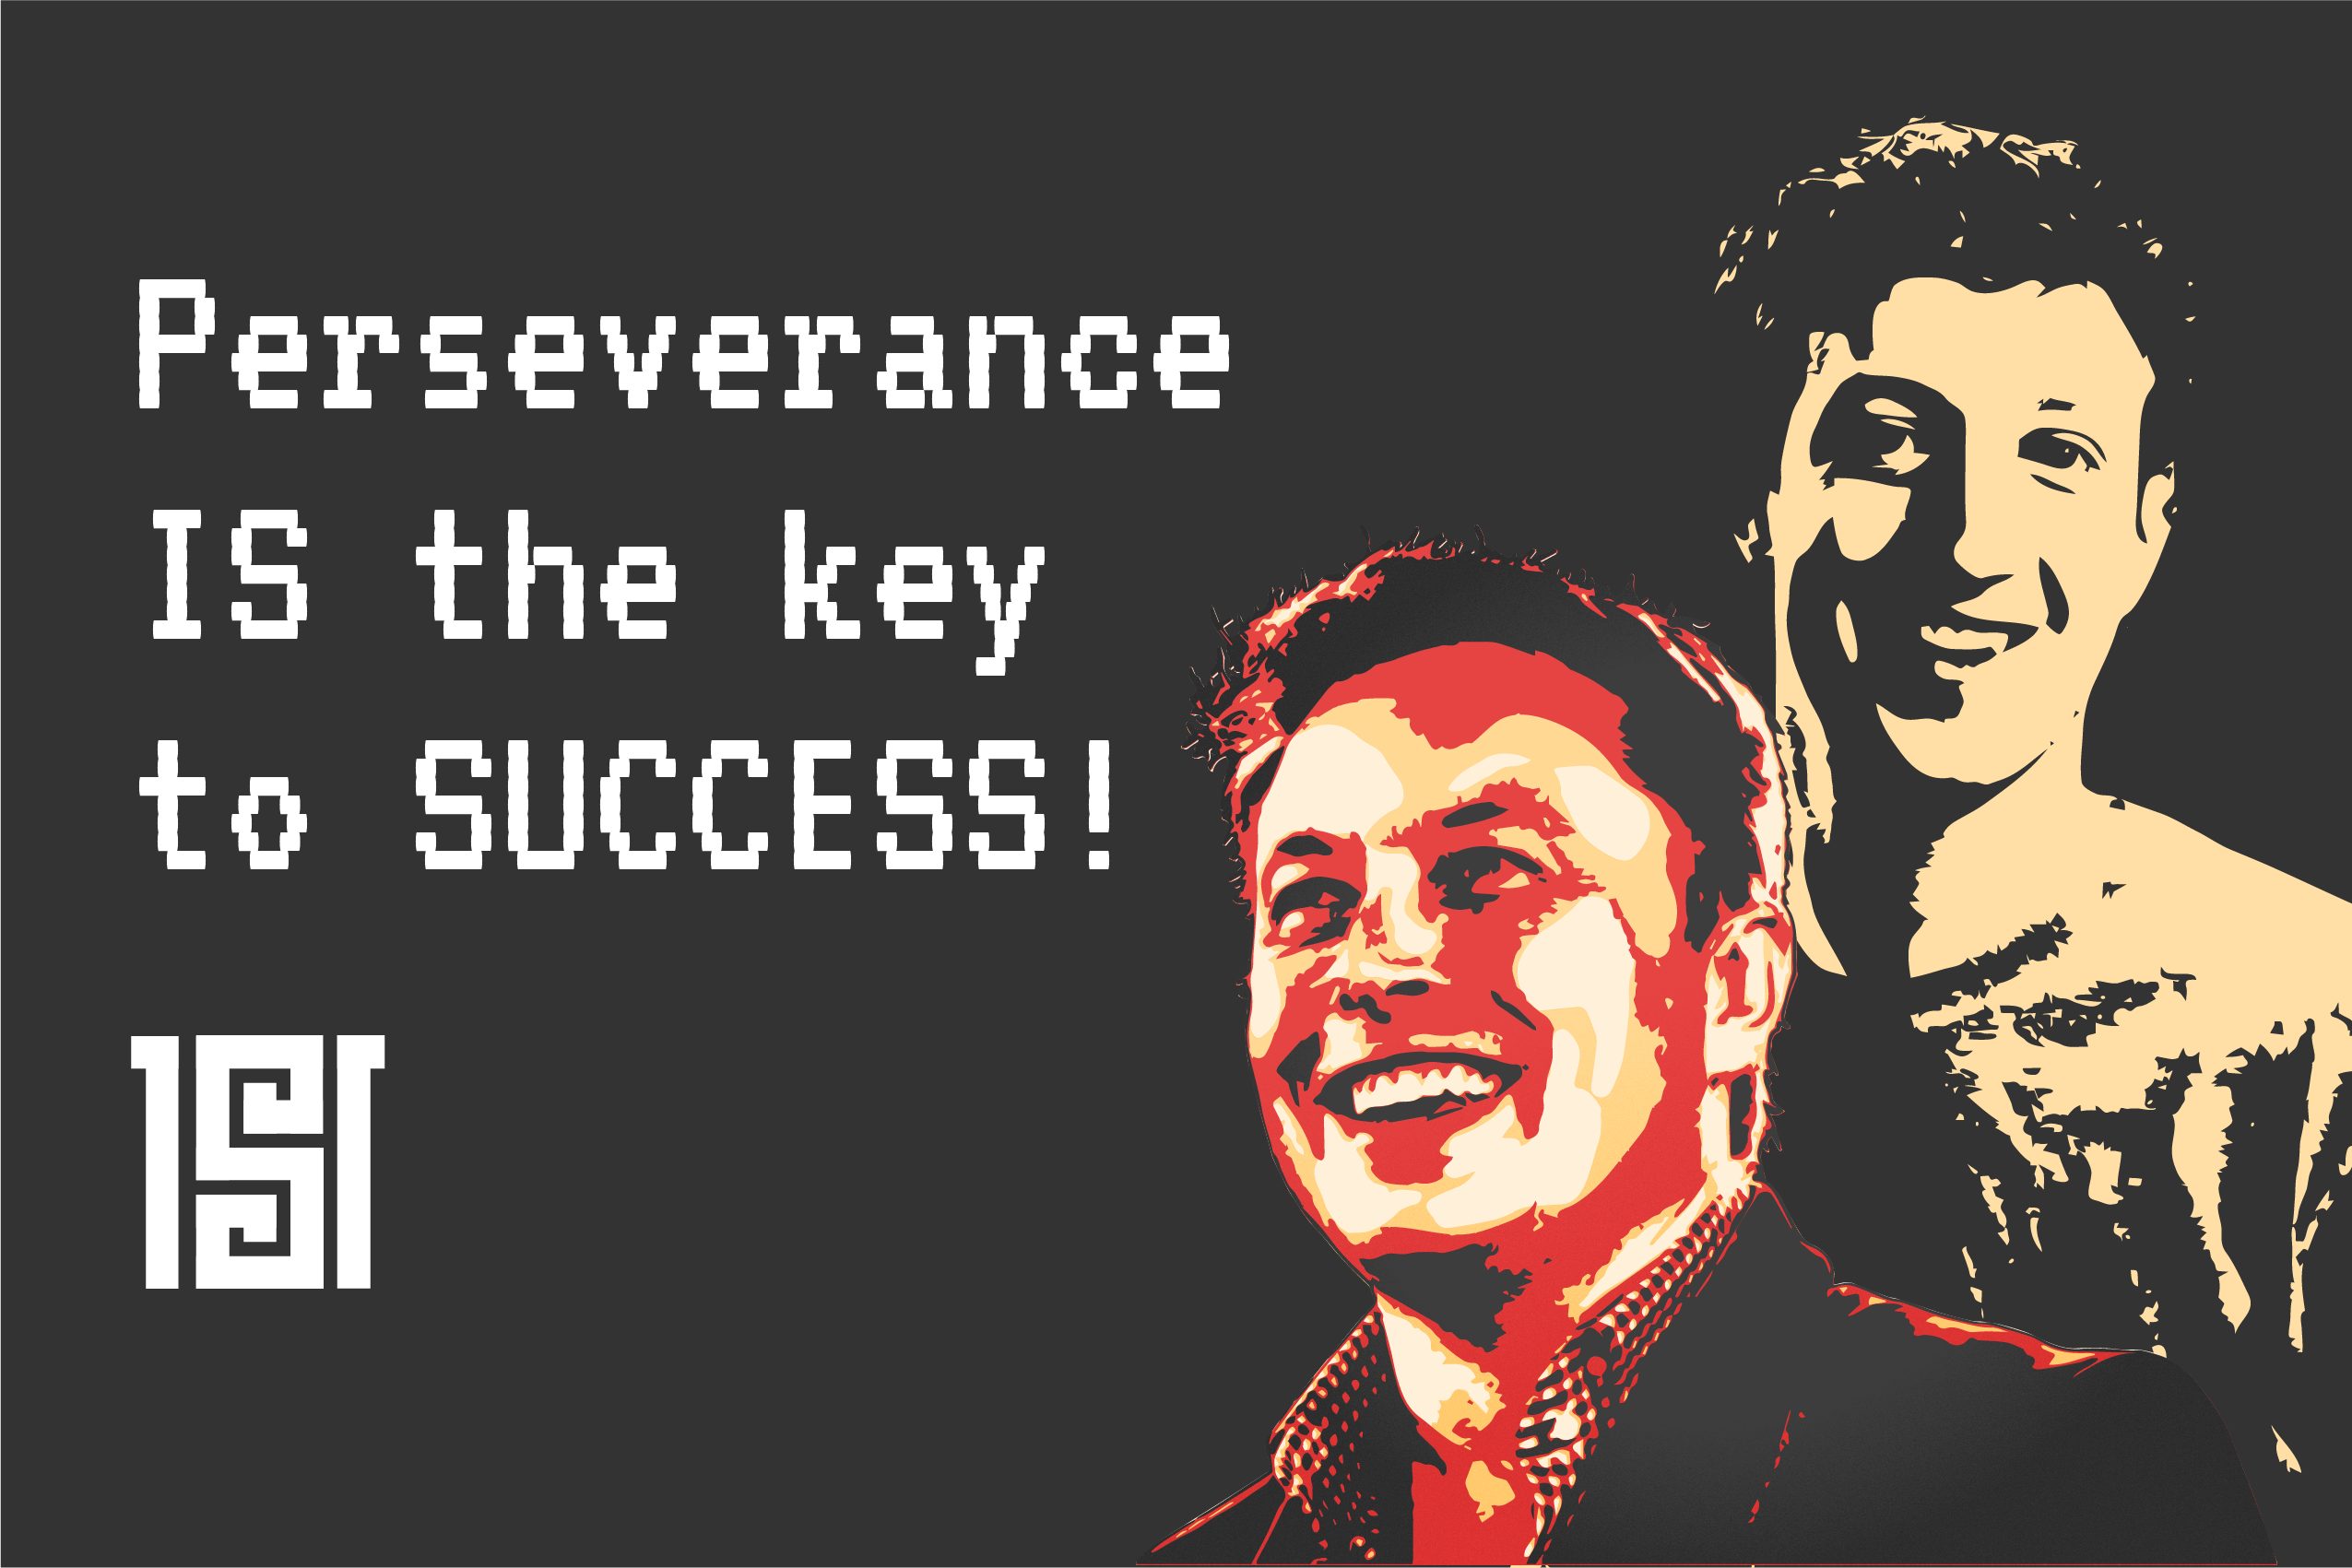 Why perseverance was the key to success for Mark Zuckerberg and Elon Musk?